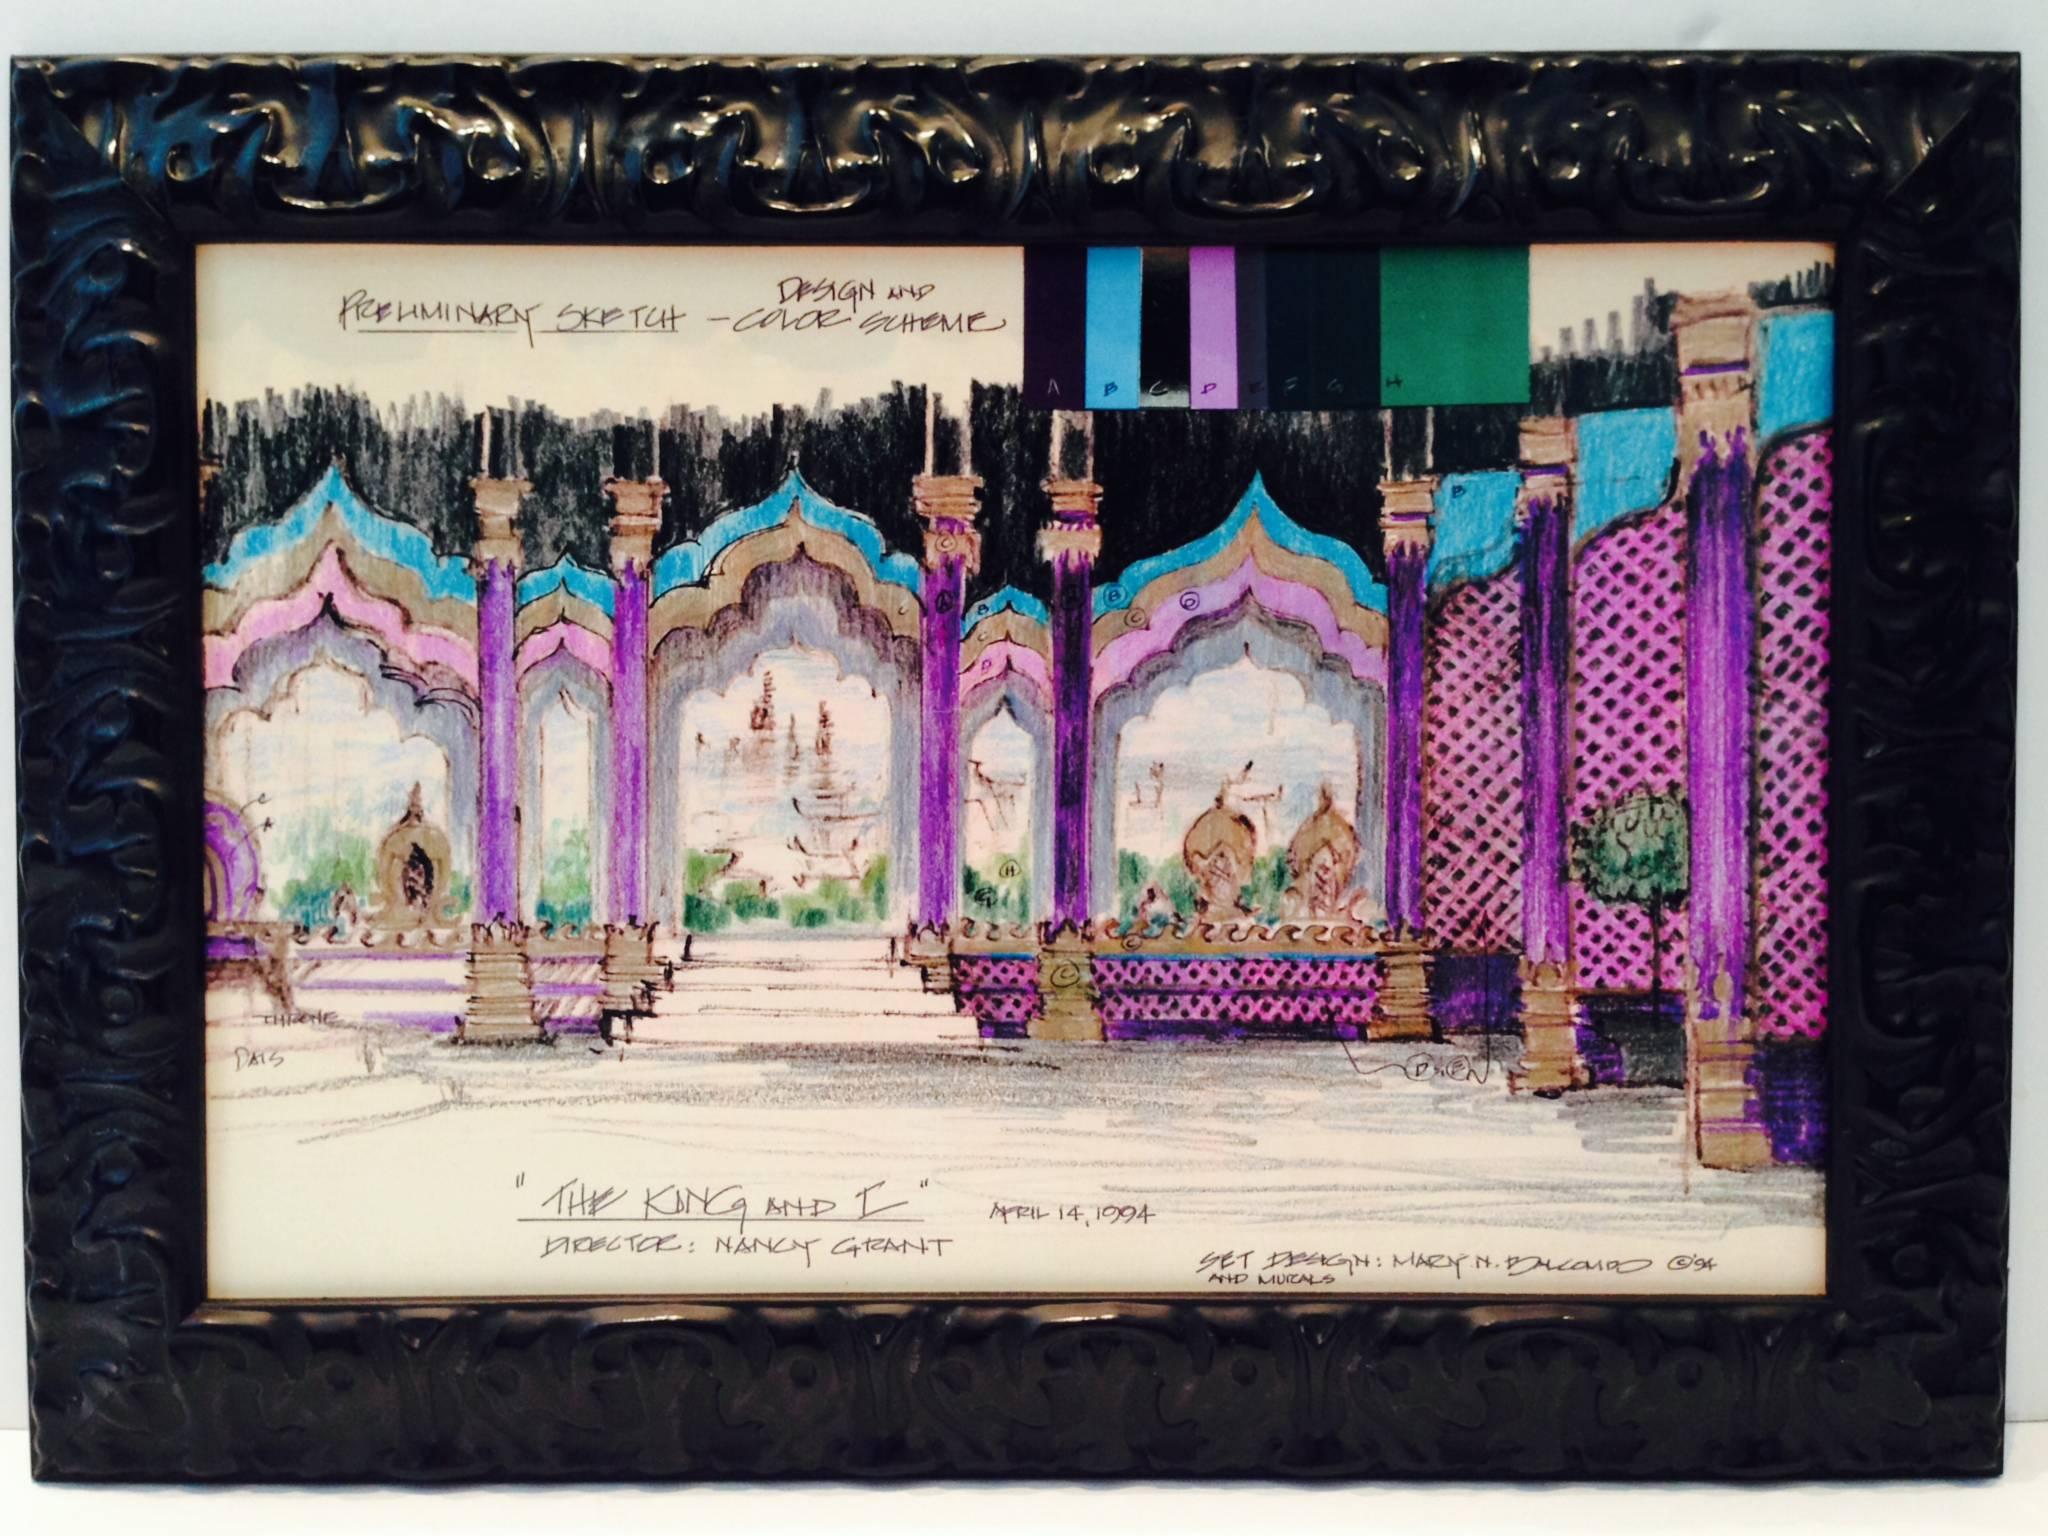 1994 hand drawn in pencil on paper sketch set design and color scheme for ‘The King And I’ by, Mary N. Balcomb. Signed lower right. Framed under archival glass in a black lacquer wood frame.
Image size, 16.5